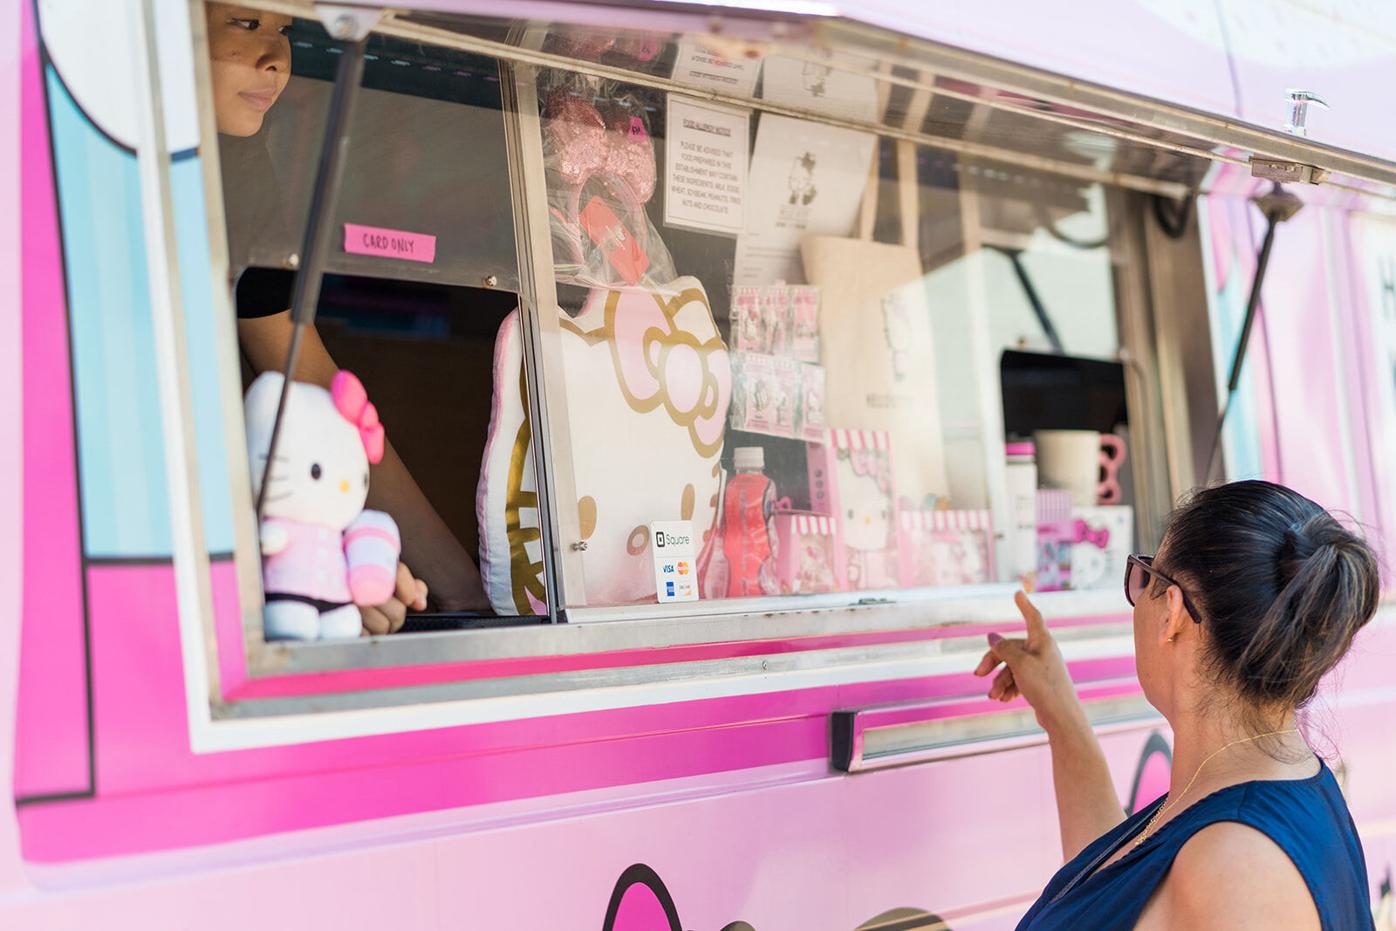 Hello Kitty Cafe Truck headed to Wauwatosa with limited-edition